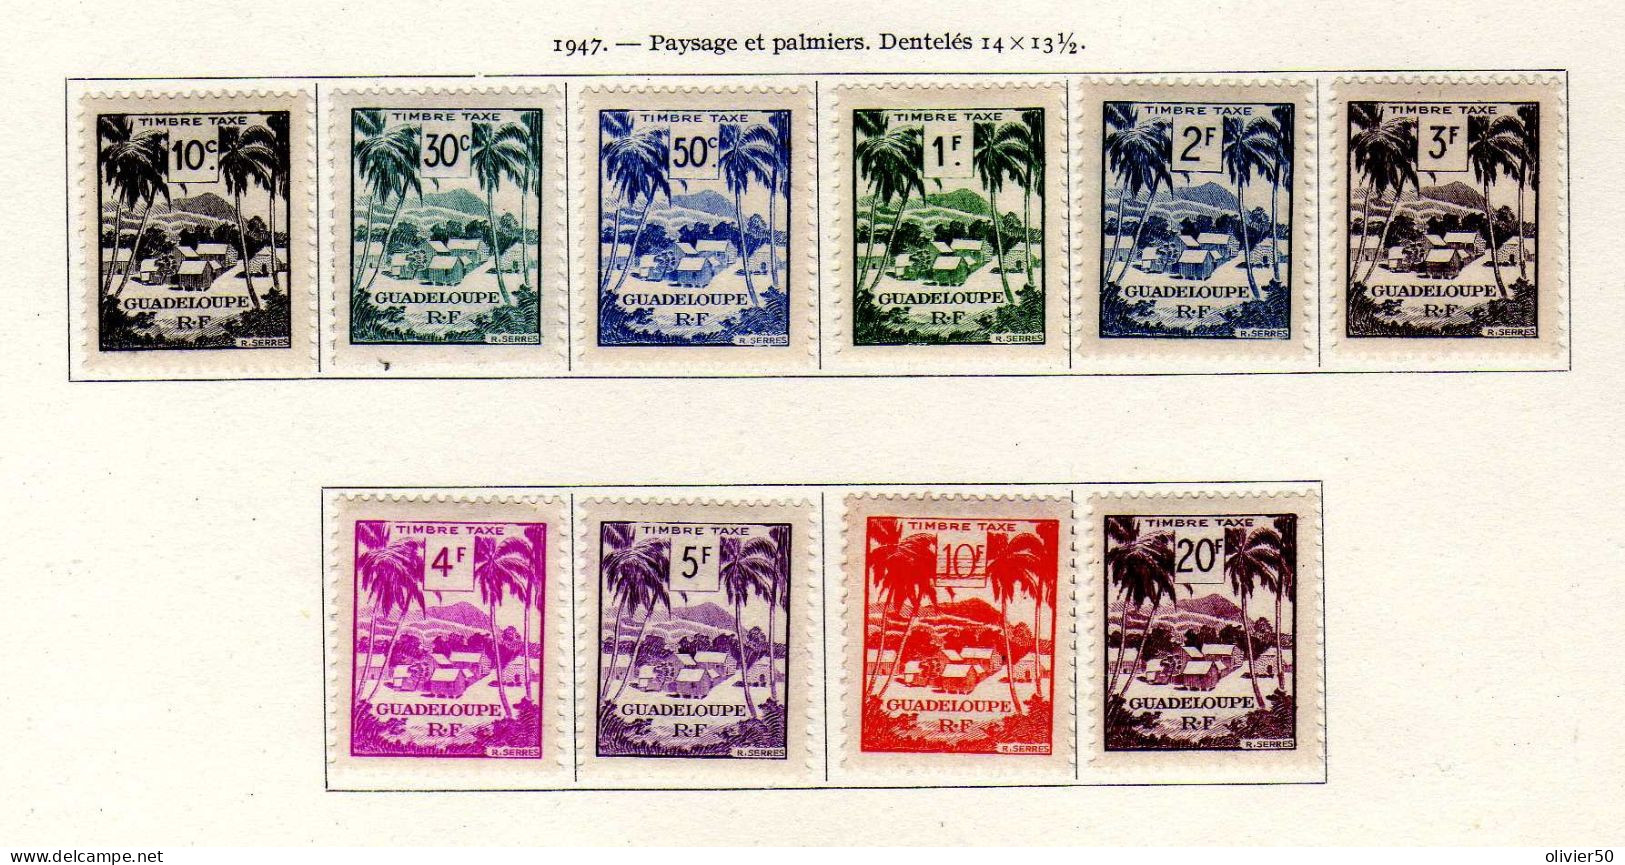 Guadeloupe - 1947 - Timbres-Taxe Palmiers - Neufs* - MH - Portomarken